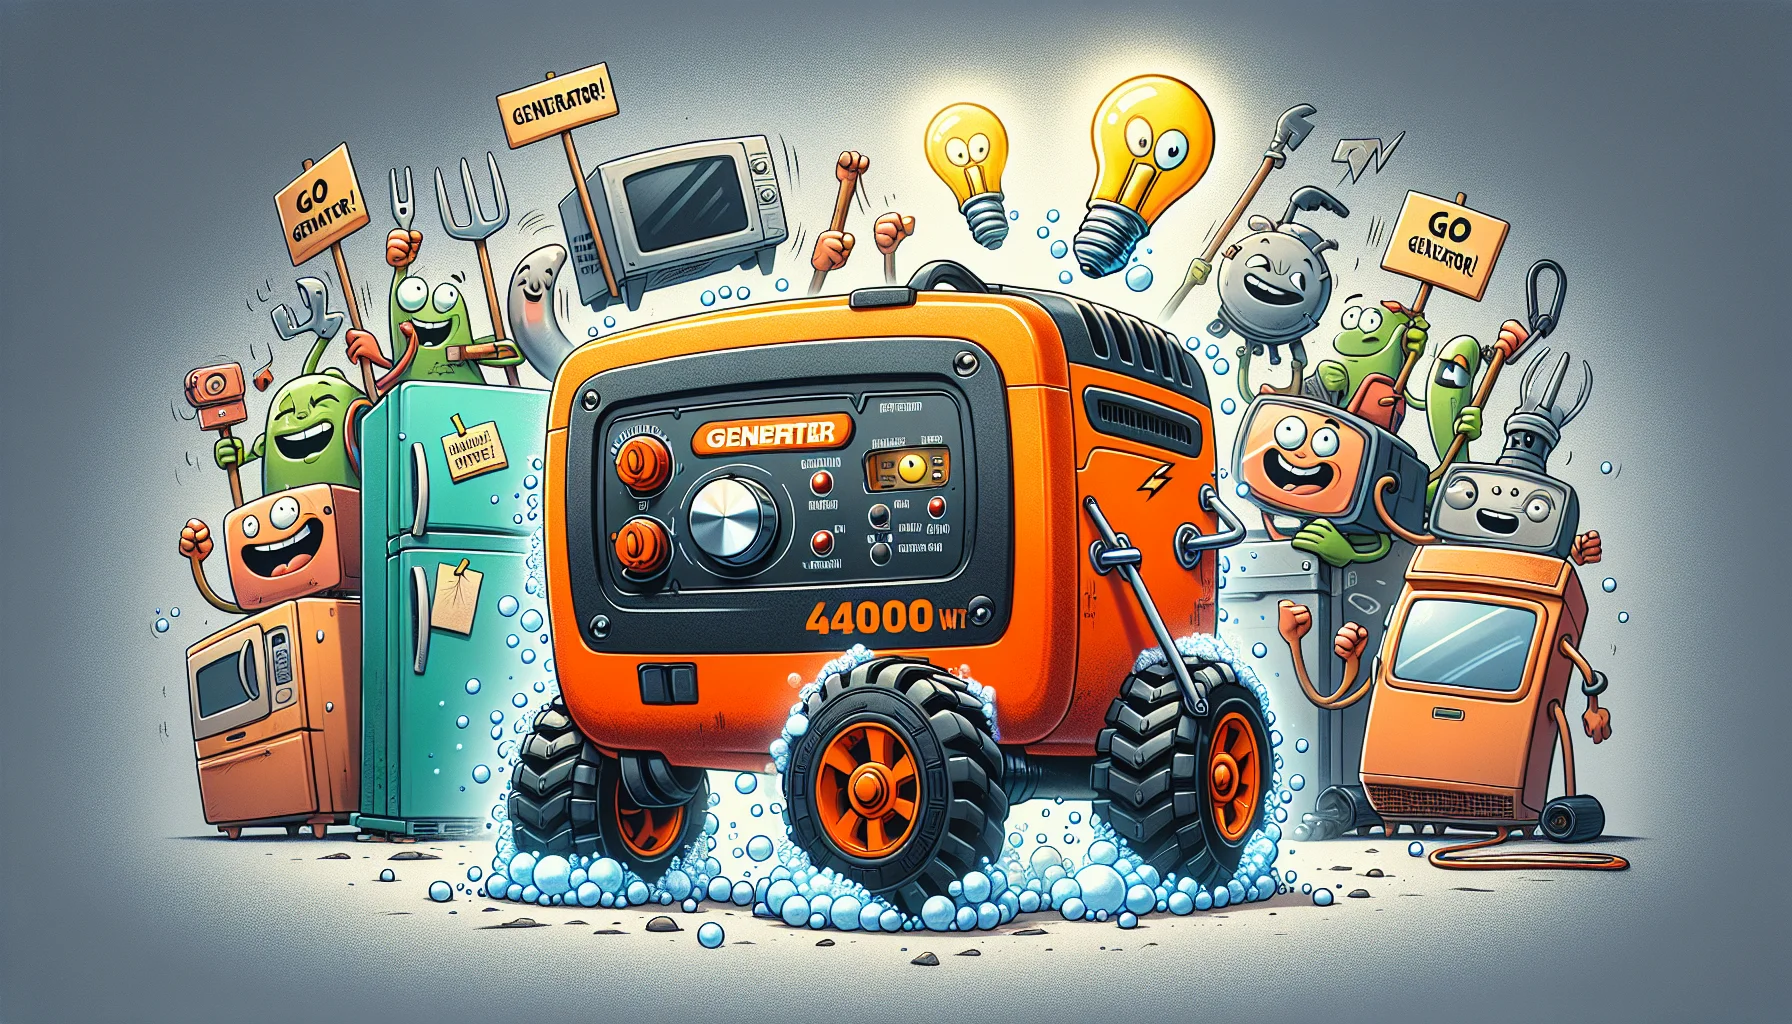 Picture a comical situation featuring a 4000 watt inverter generator. It's vibrant orange with rugged black wheels and a shiny silver handle. Bubbles are whirling around it, as though it's a person taking a bubble bath, and it's even wearing a bath cap. Behind it, a handful of household appliances are lined up eagerly: a refrigerator, a television, a light bulb, and a washing machine. These appliances are personified - they have cartoony eyes, hands and feet, and they're waving cheer signs with slogans like 'Go Generator!' and 'Power Up!'. They seem ecstatic about the idea of the generator producing electricity for them.